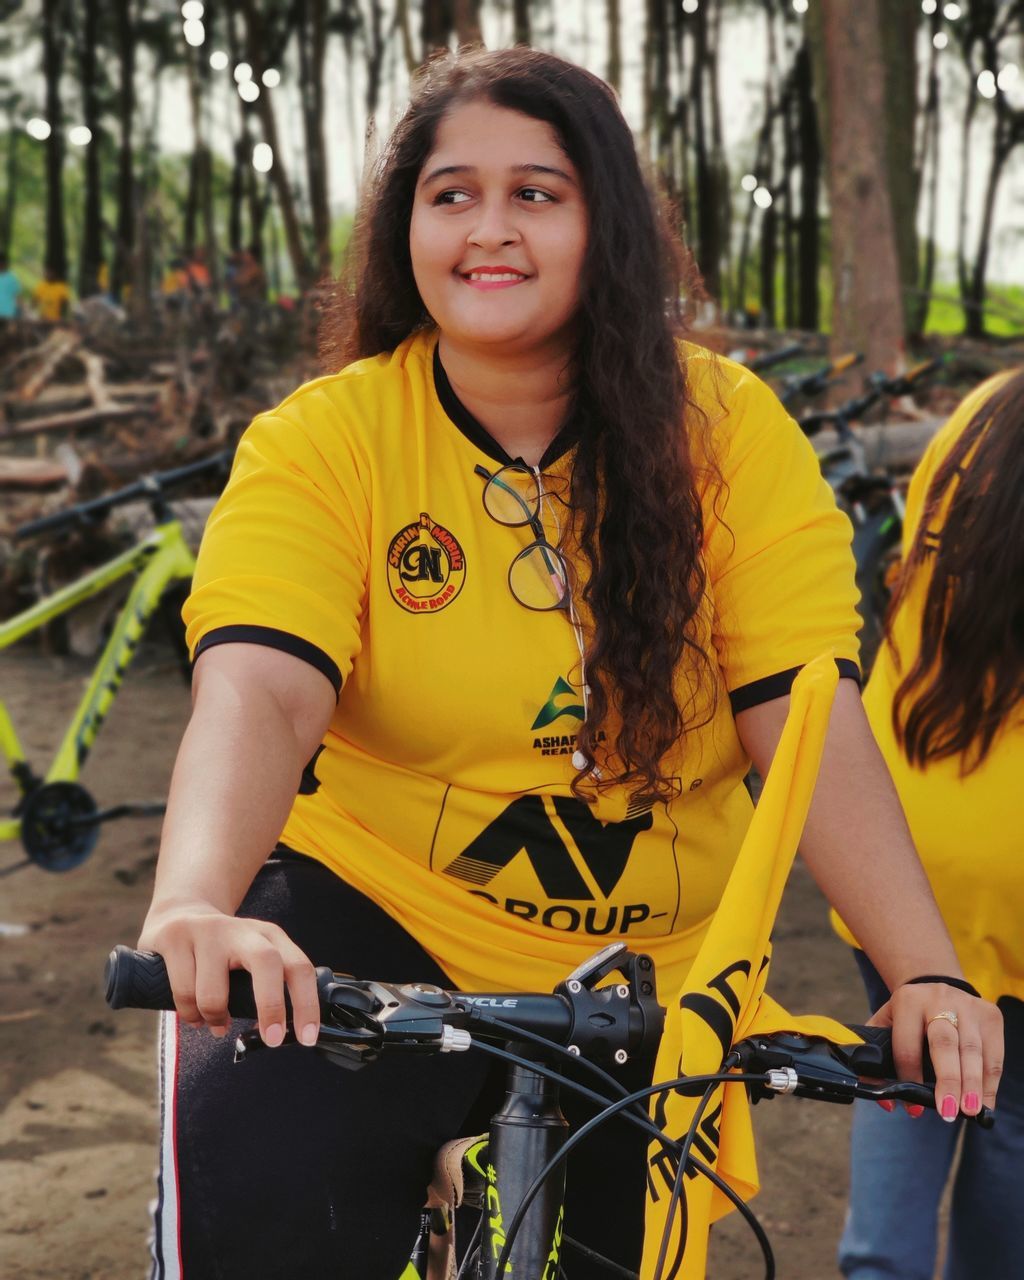 real people, lifestyles, looking at camera, yellow, leisure activity, portrait, one person, bicycle, three quarter length, hairstyle, front view, smiling, transportation, tree, casual clothing, long hair, day, nature, mode of transportation, hair, outdoors, riding